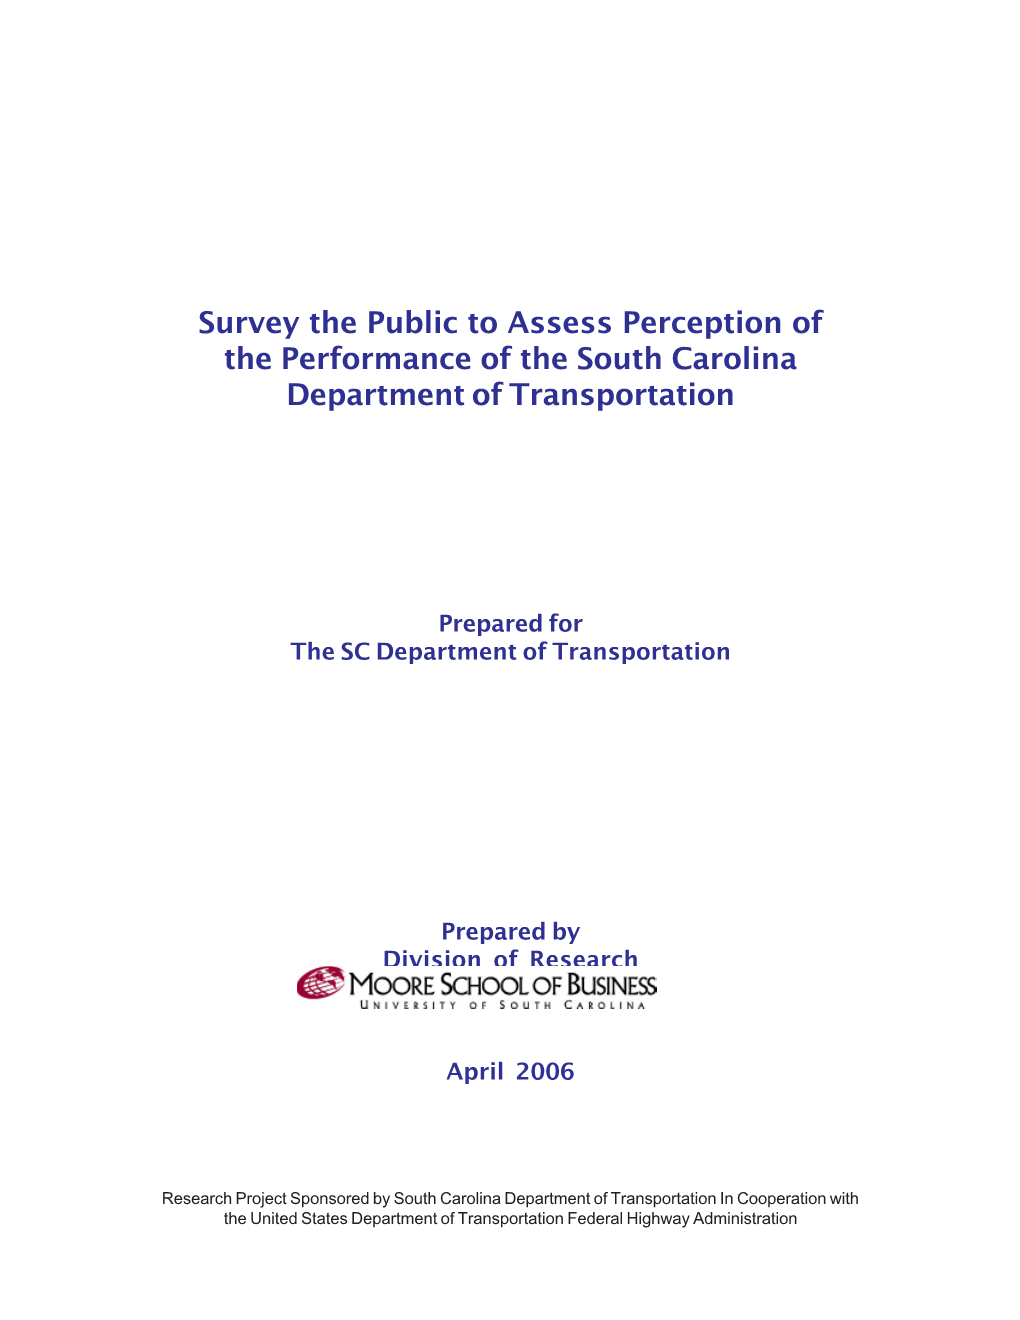 Survey the Public to Assess Perception of the Performance of the South Carolina Department of Transportation